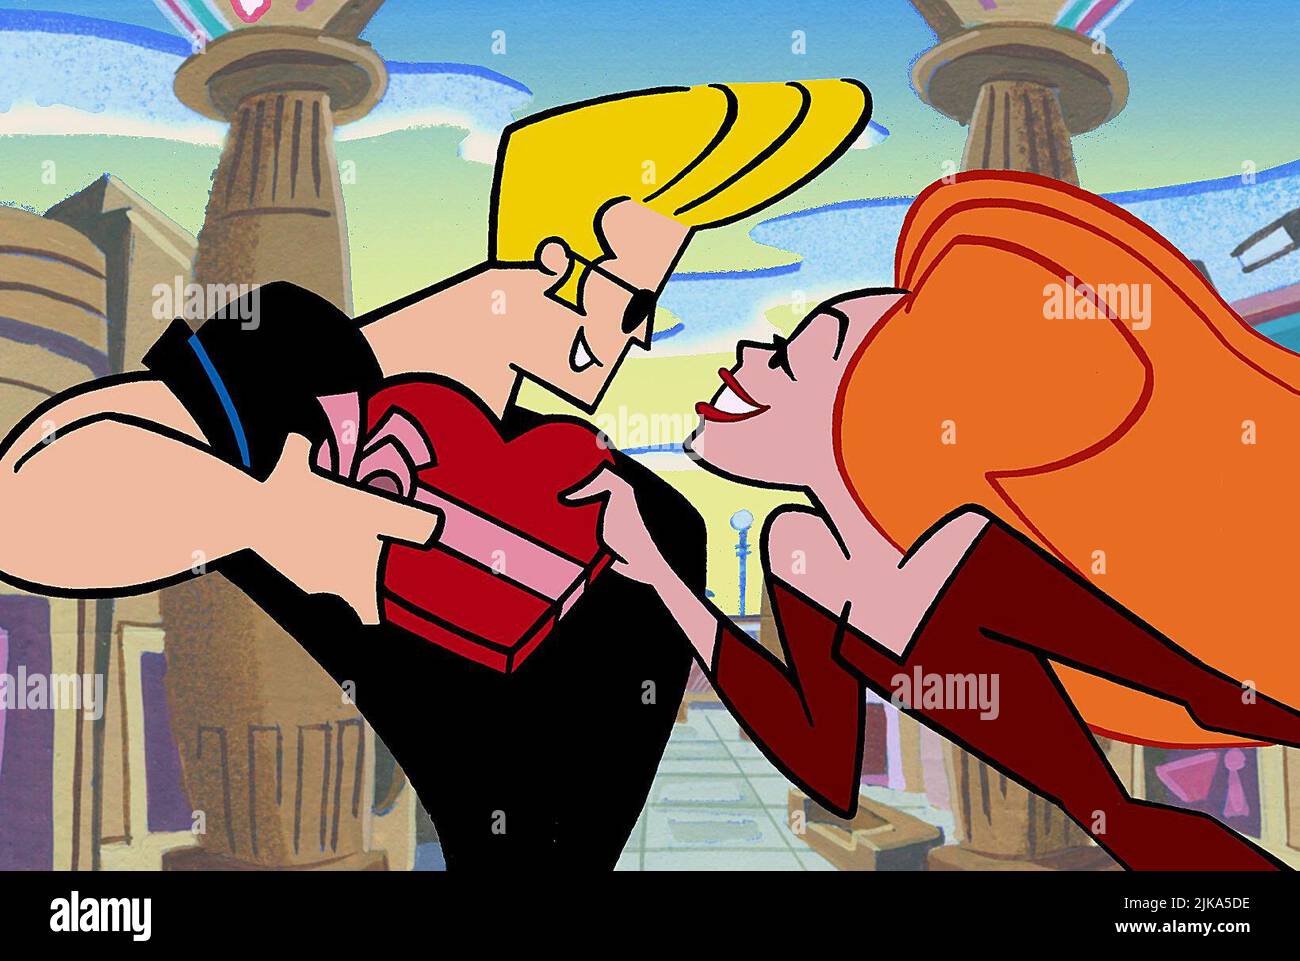 https://c8.alamy.com/comp/2JKA5DE/johnny-bravo-television-johnny-bravo-1997-07-july-1997-warning-this-photograph-is-for-editorial-use-only-and-is-the-copyright-of-hanna-barbera-andor-the-photographer-assigned-by-the-film-or-production-company-and-can-only-be-reproduced-by-publications-in-conjunction-with-the-promotion-of-the-above-film-a-mandatory-credit-to-hanna-barbera-is-required-the-photographer-should-also-be-credited-when-known-no-commercial-use-can-be-granted-without-written-authority-from-the-film-company-2JKA5DE.jpg